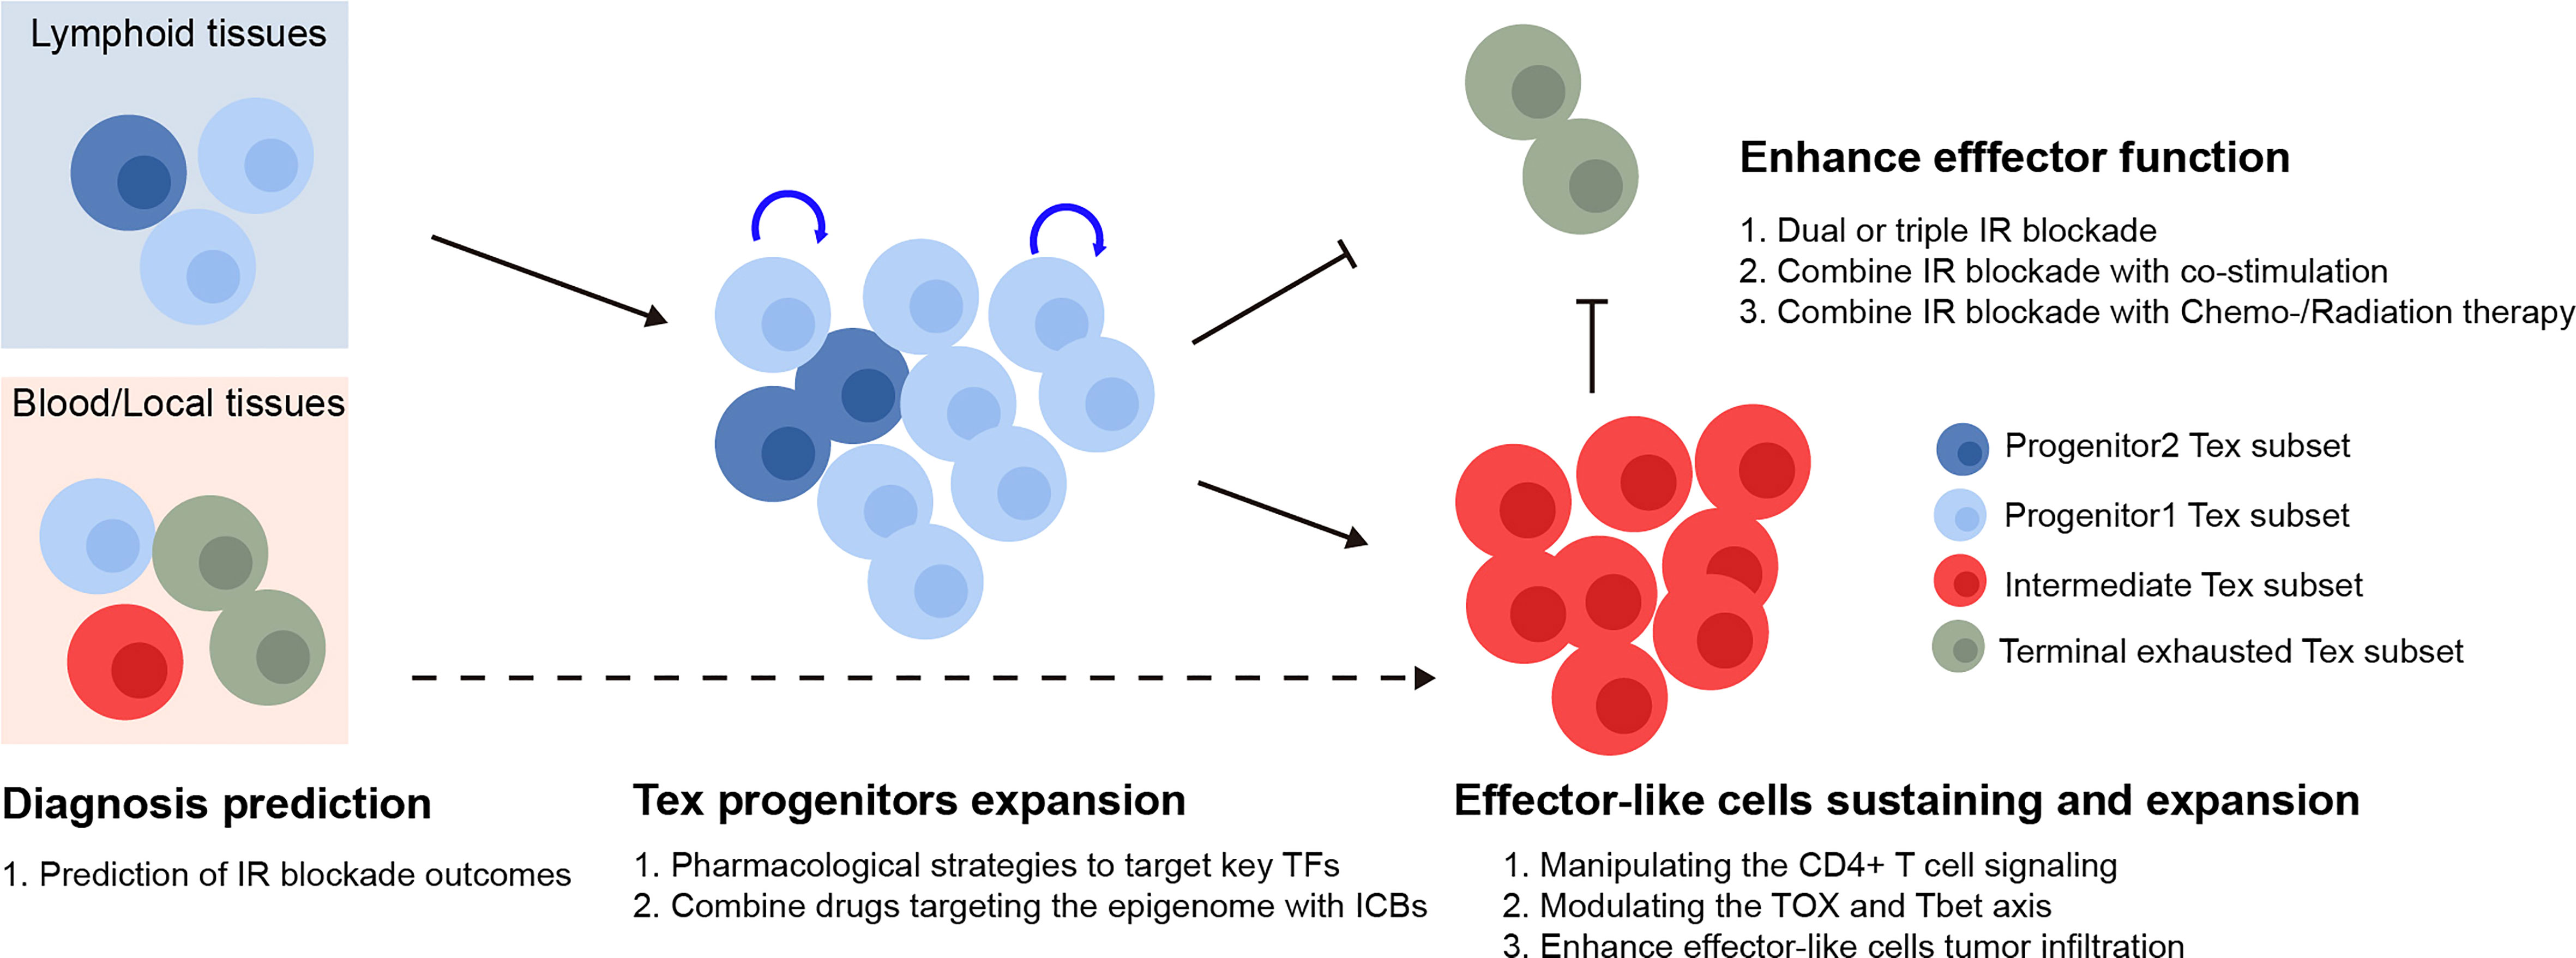 MYB orchestrates T cell exhaustion and response to checkpoint inhibition